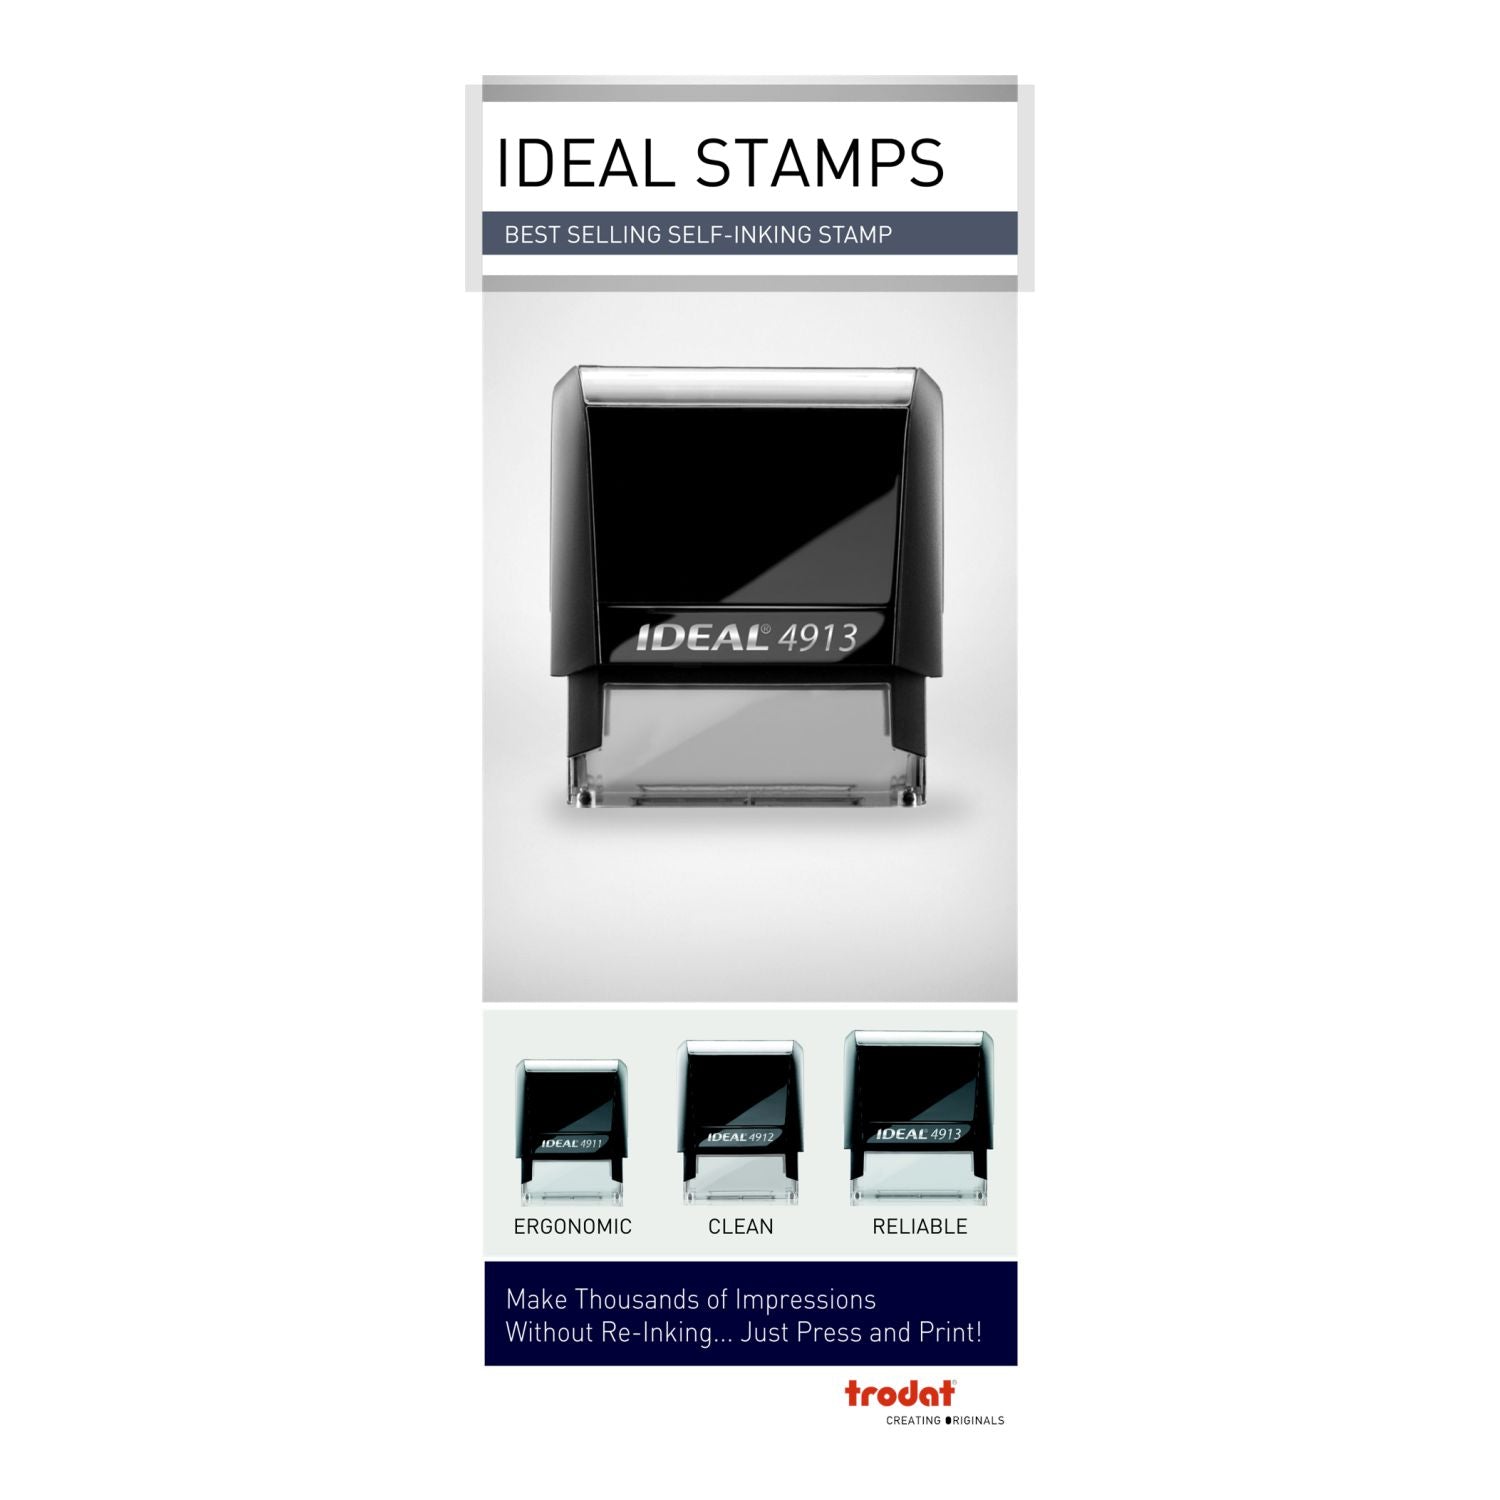 IDEAL Envelope Stuffers - Rubber Stamp Materials